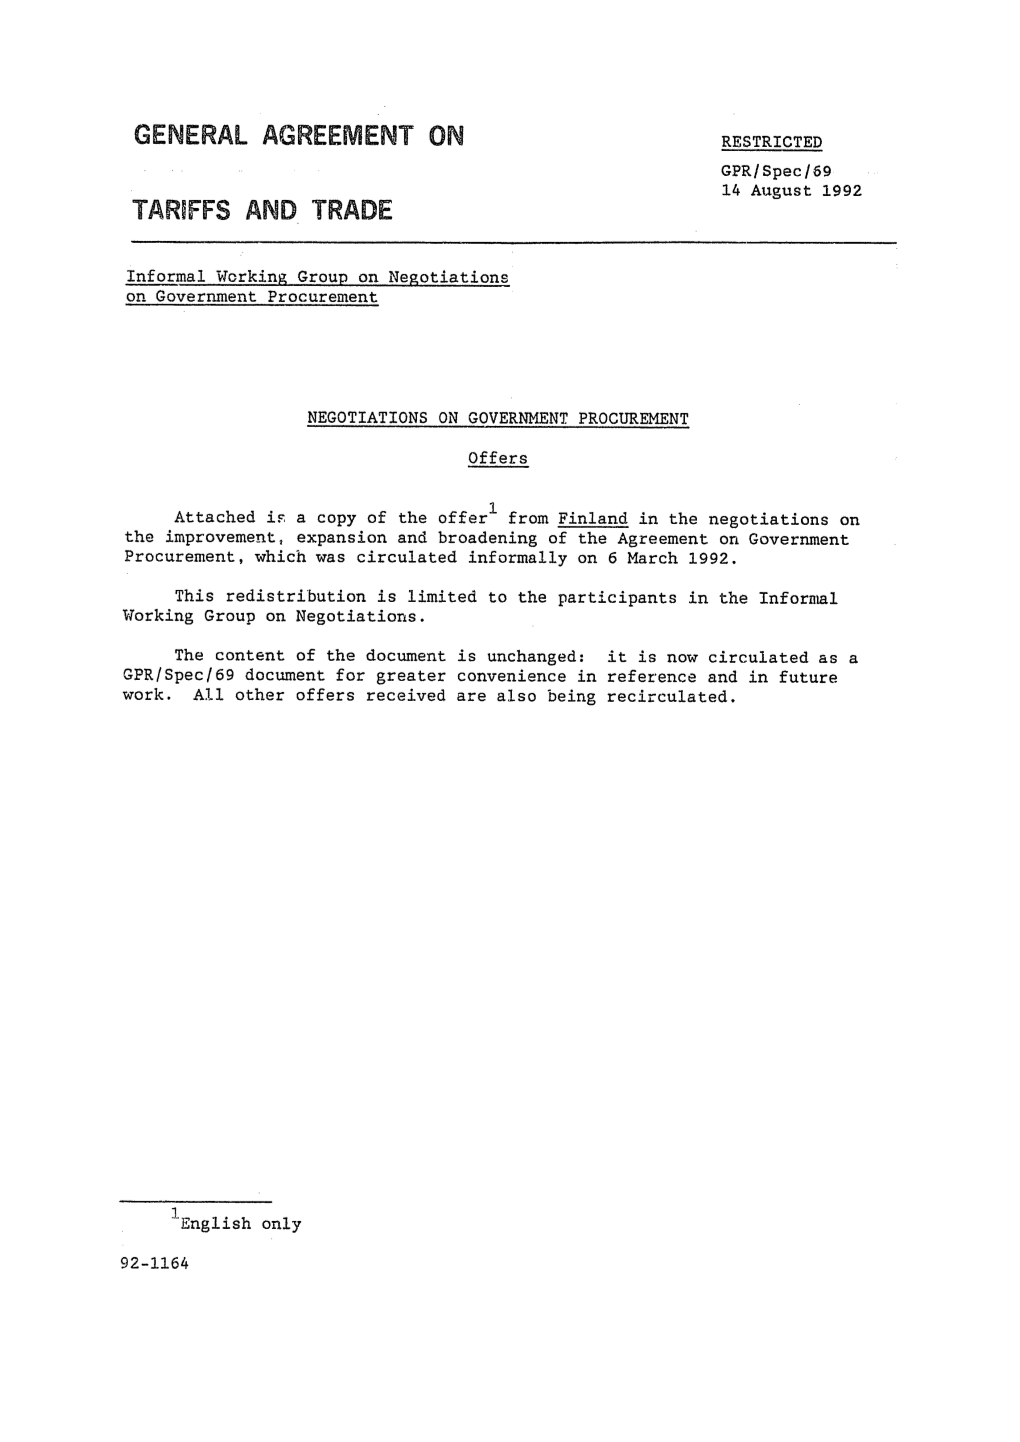 GENERAL AGREEMENT on RESTRICTED GPR/Spec/69 14 August 1992 TARIFFS and TRADE